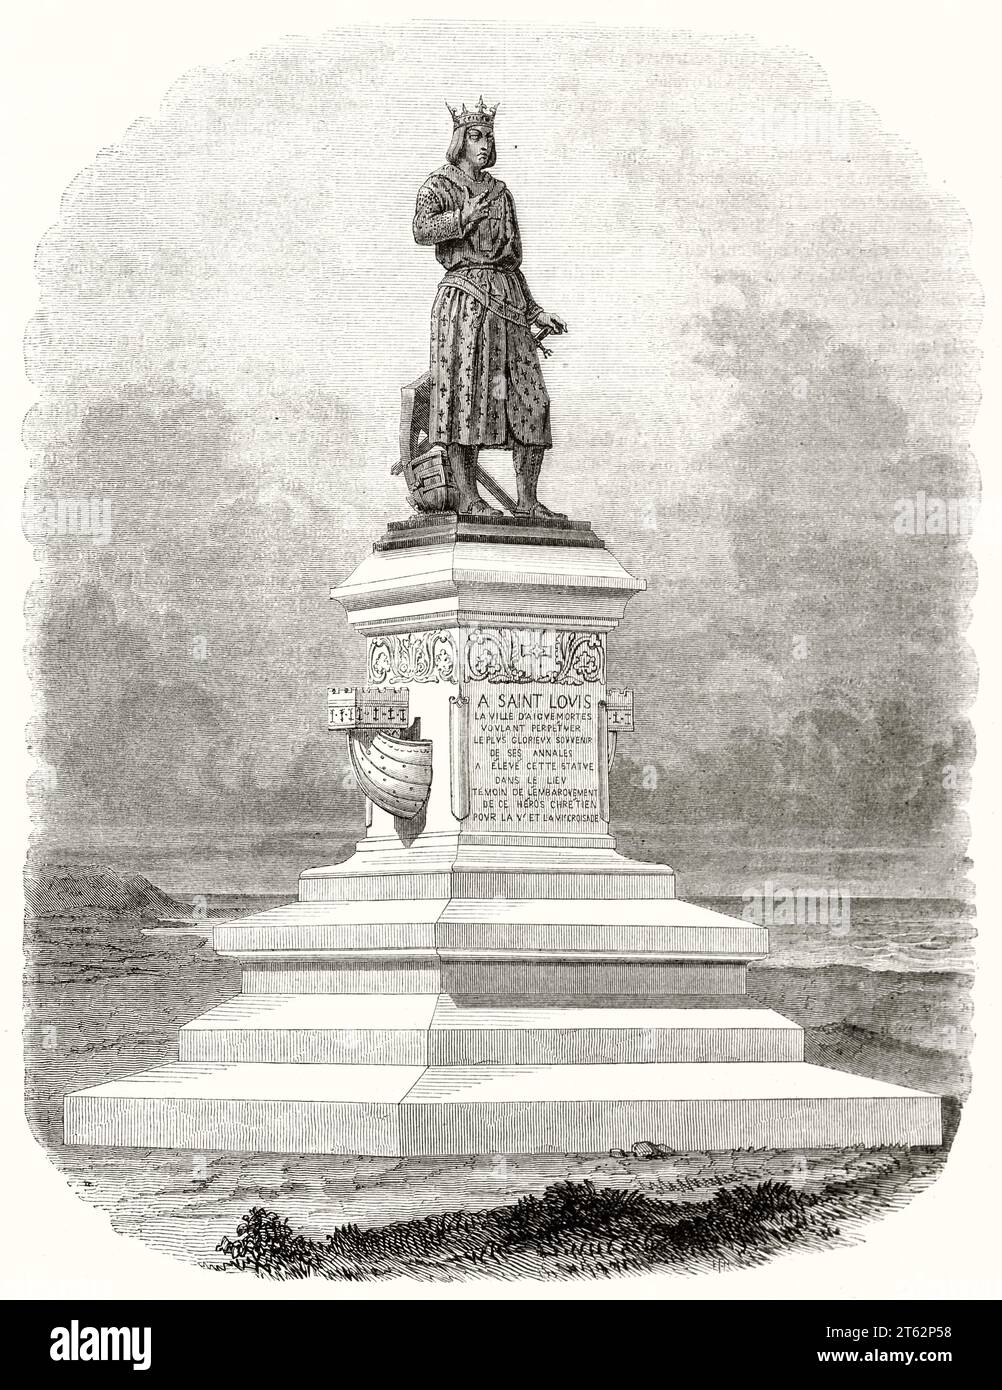 Old illustration of Saint-Louis statue in Aigues-Mortes, Gard, France. After Pradier, publ. on Magasin Pittoresque, Paris, 1849 Stock Photo